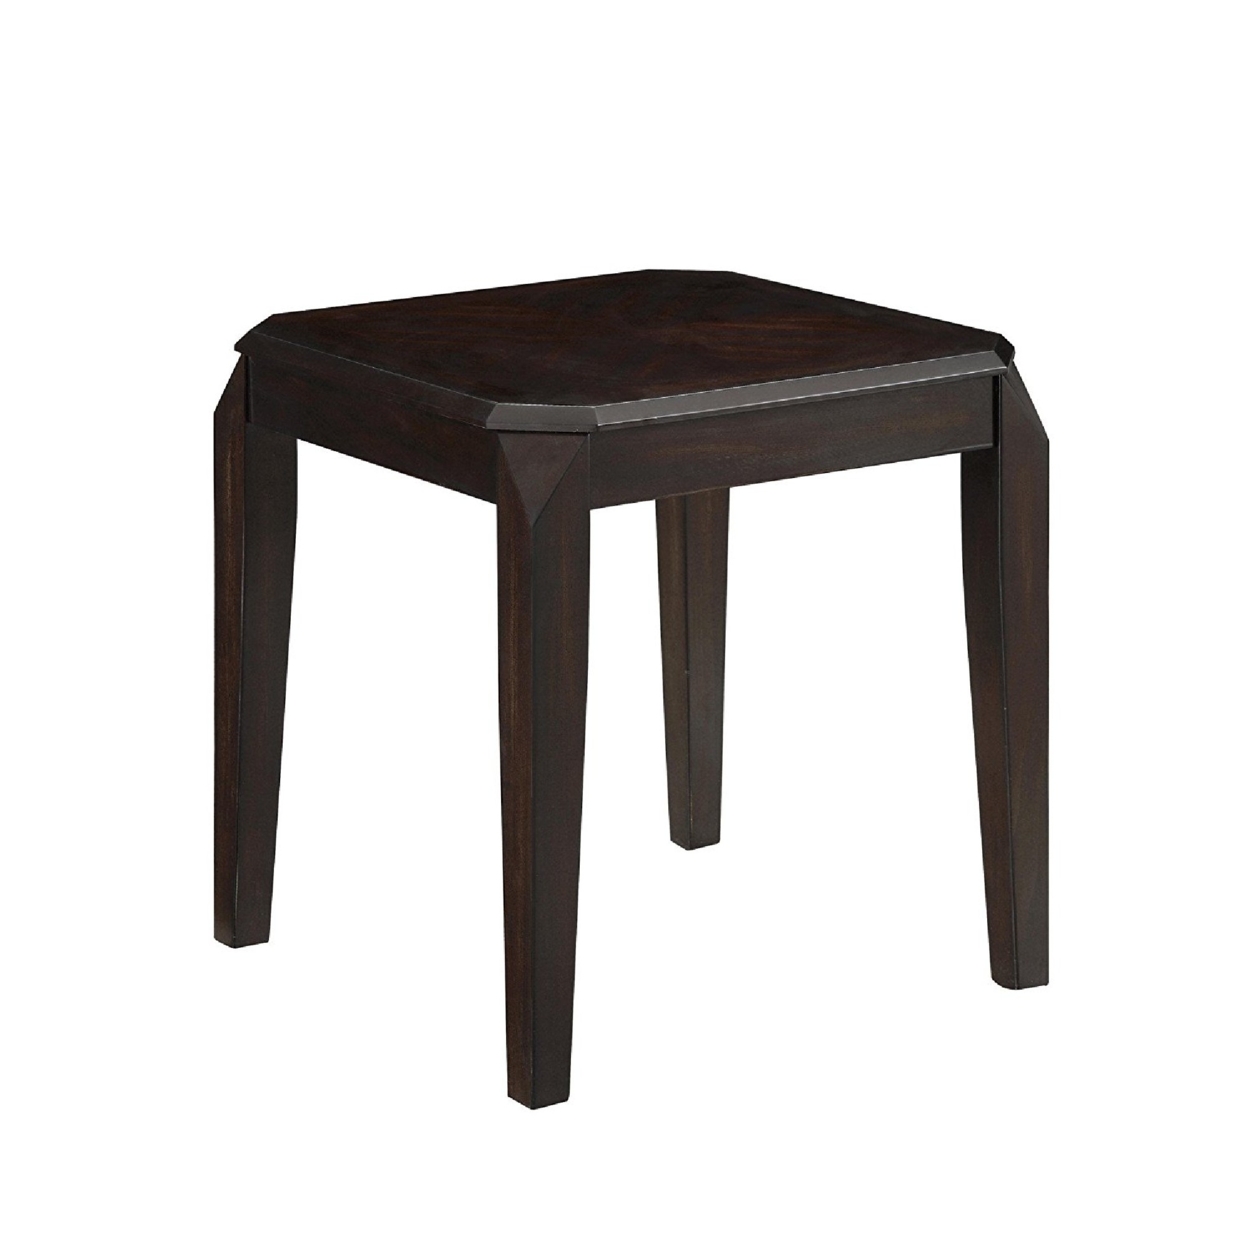 Solid Wooden End Table With Beveled Corners, Walnut Brown- Saltoro Sherpi